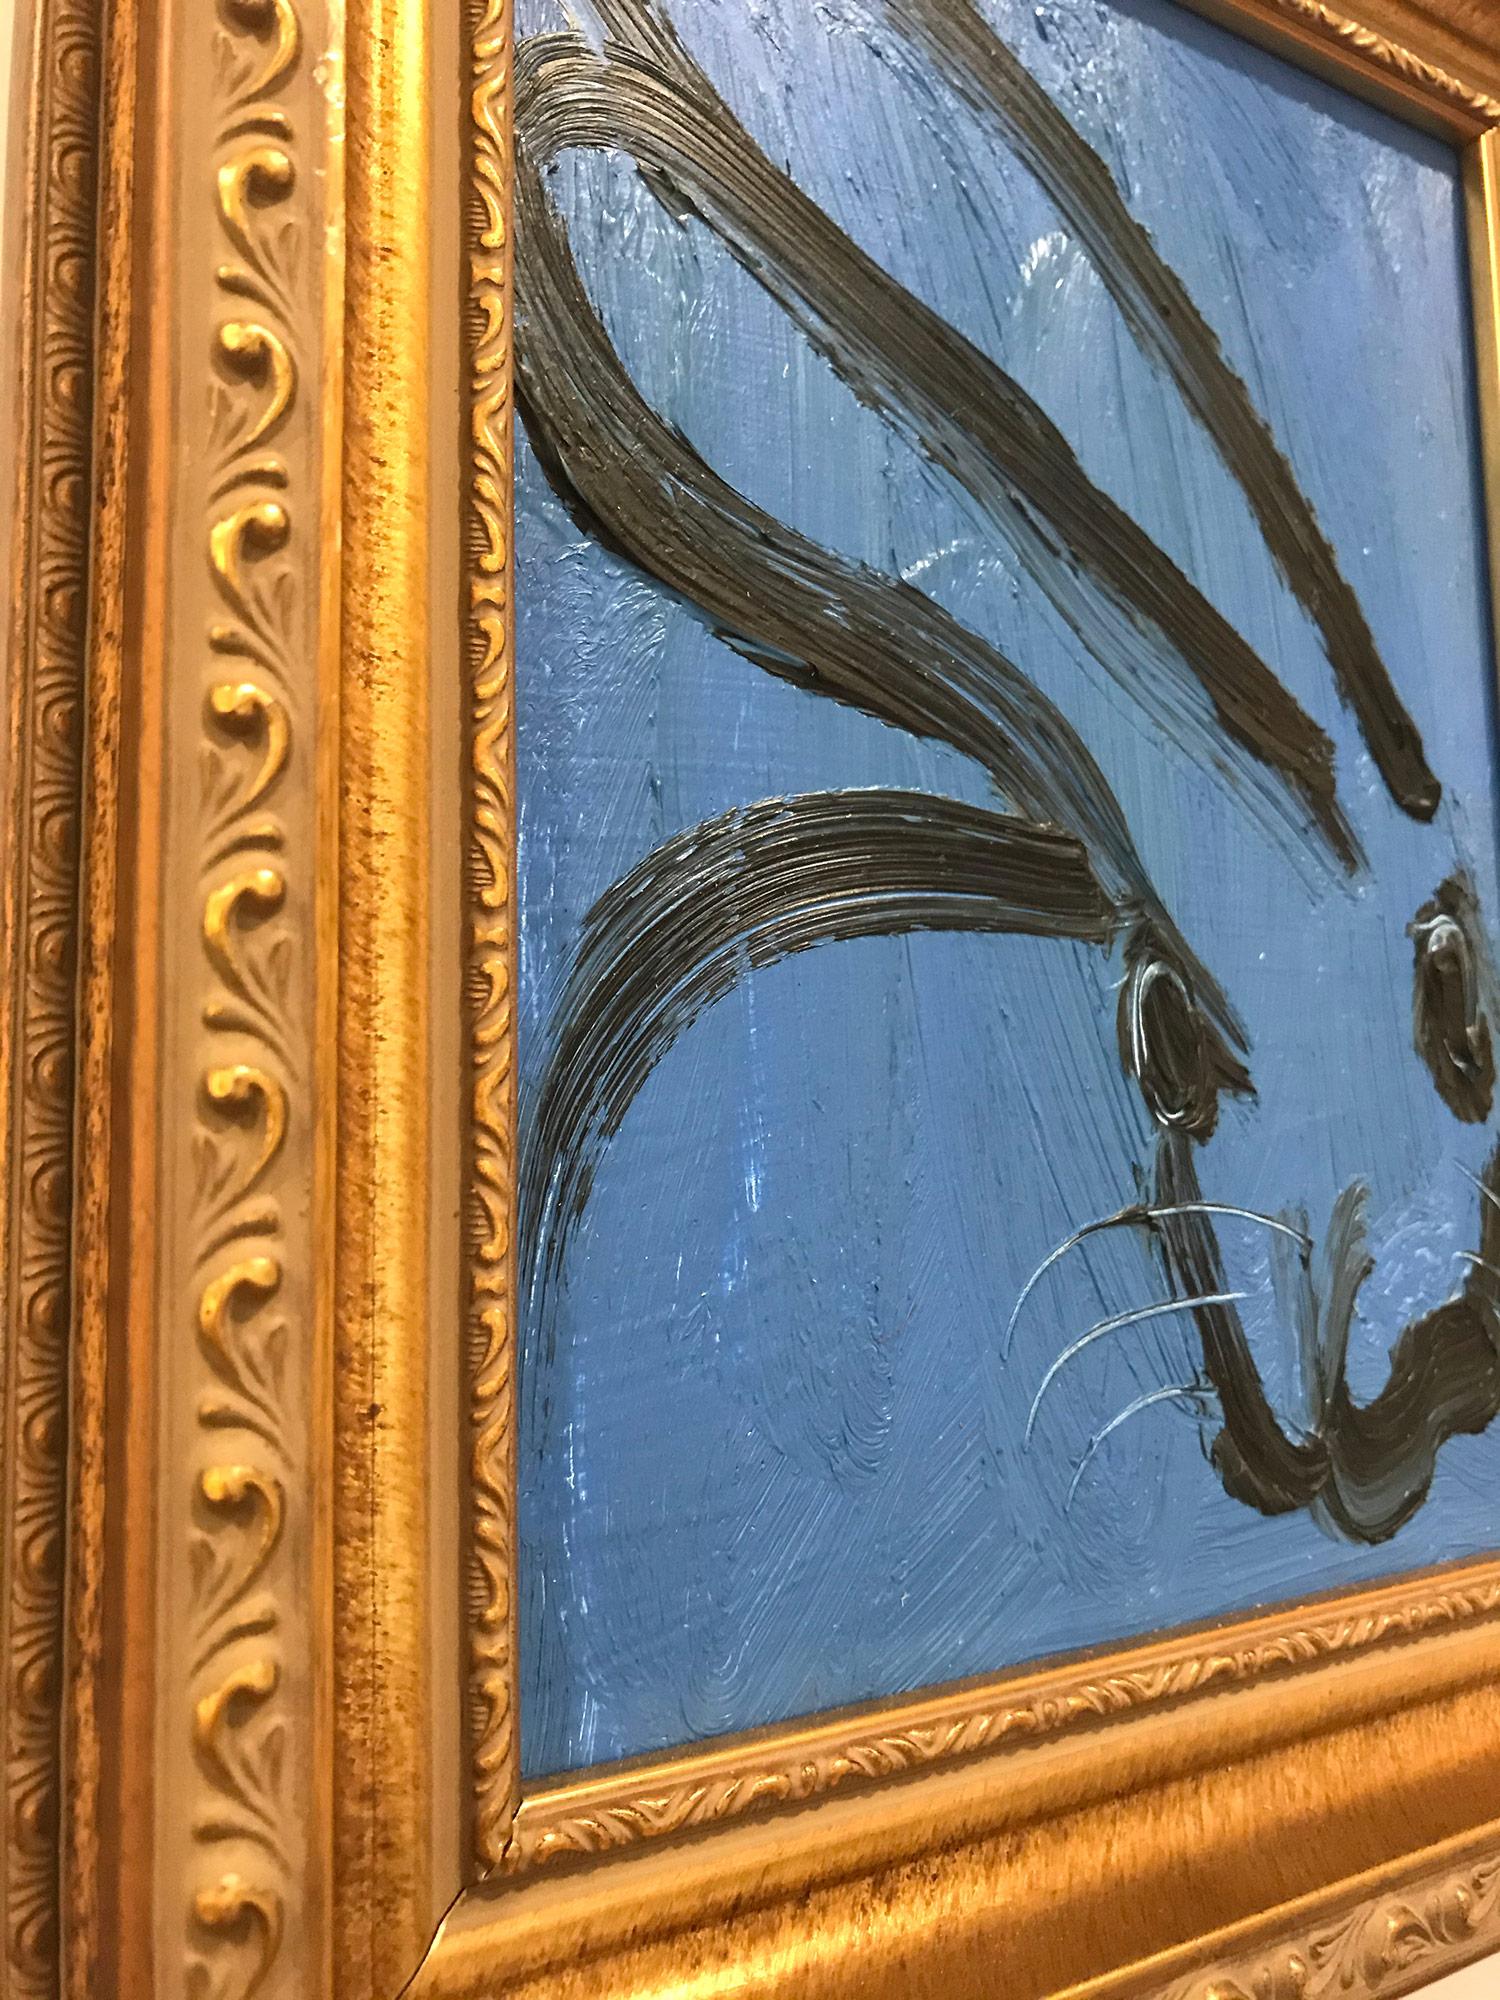 Blusy (Black Outlined Bunny on Royal Blue Background) - Painting by Hunt Slonem